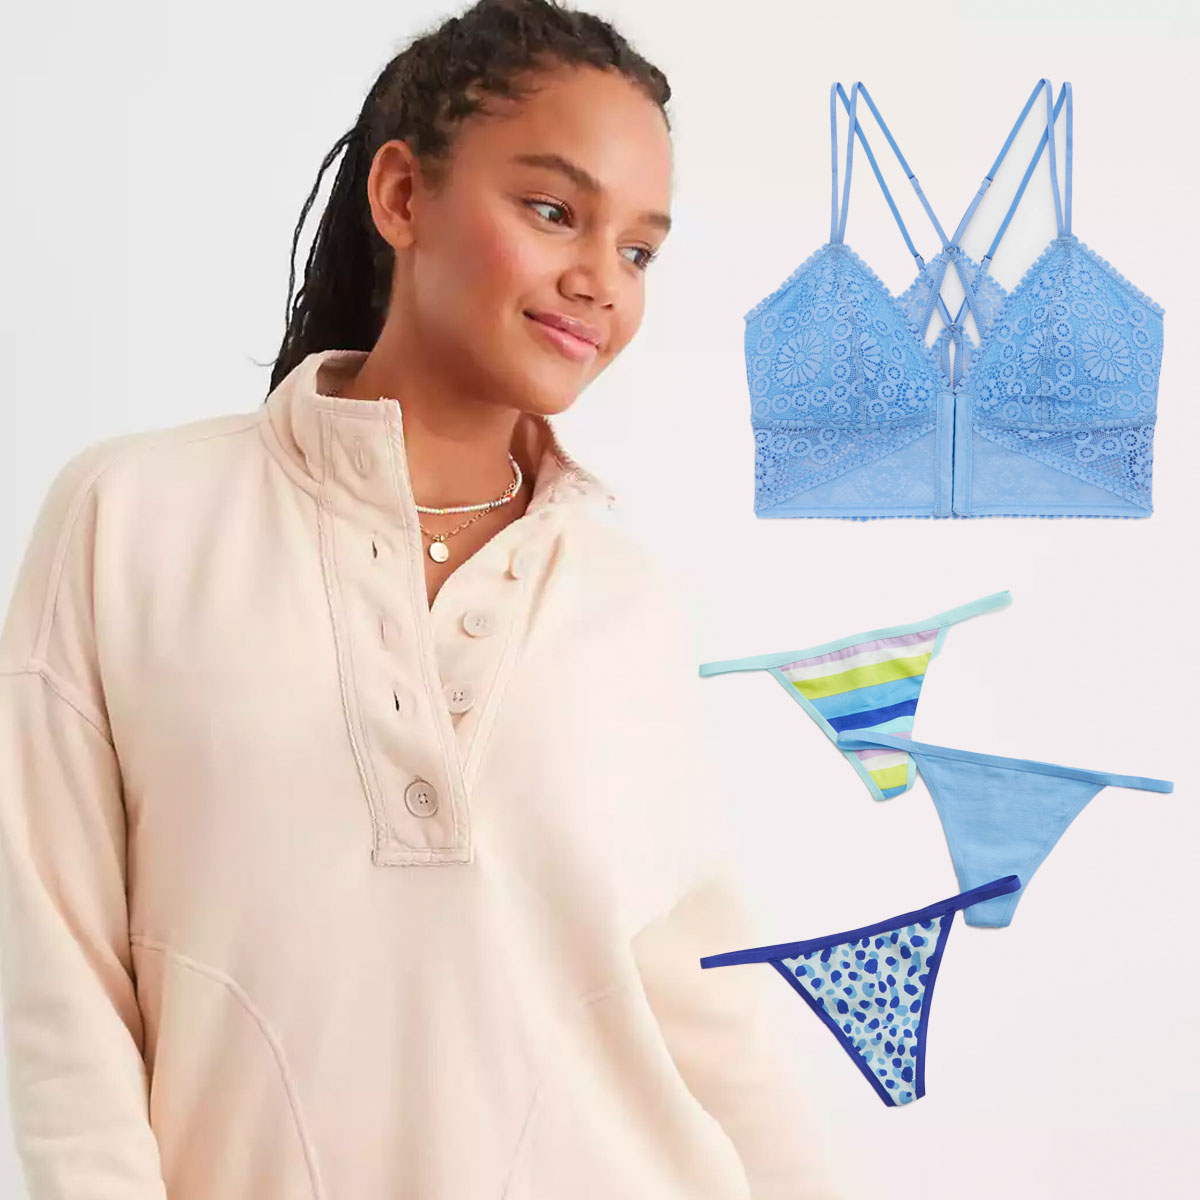 Shop 60% Off Aerie Clearance Bras, Underwear & More for Less